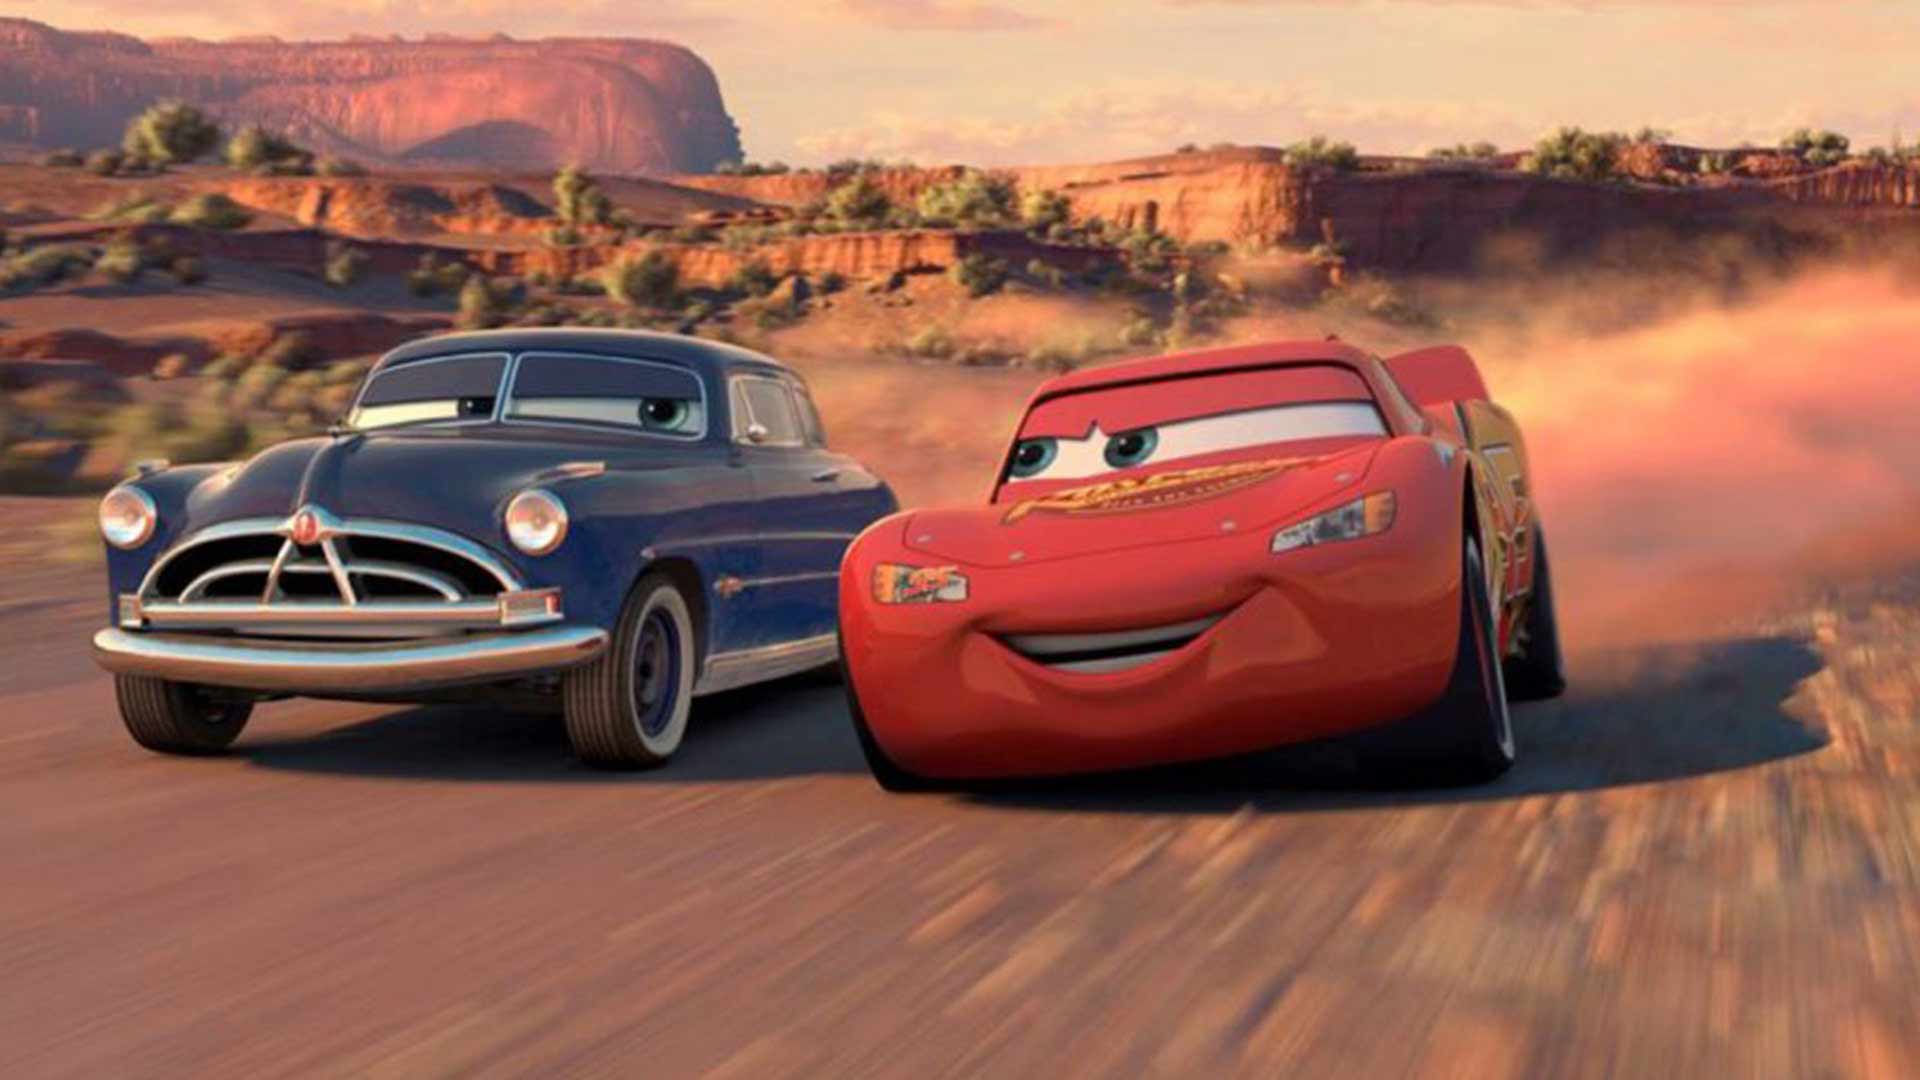 Hudson and McQueen on the road in car animation